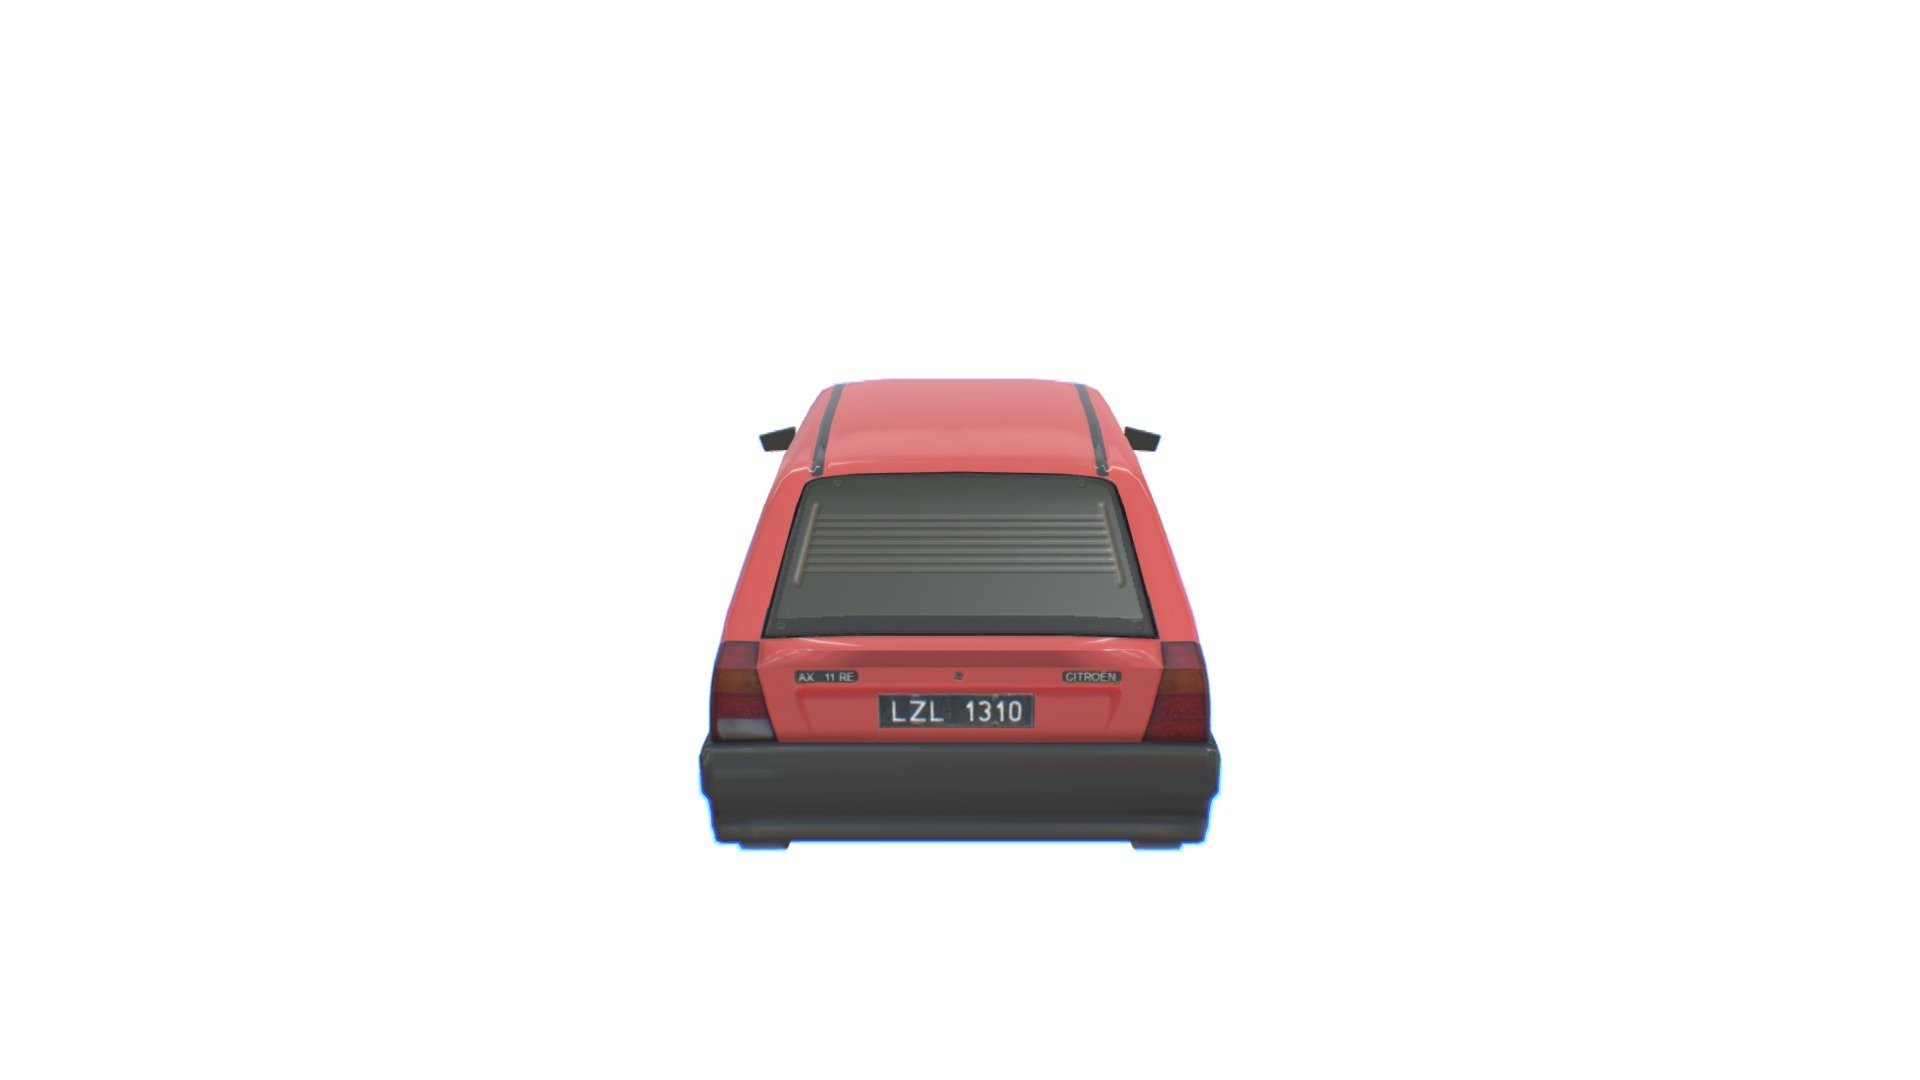 Low poly model made as fan project for a game. Available to download here: https://steamcommunity.com/sharedfiles/filedetails/?id=2257899055 - Citroën AX - 3D model by Uniguri 3d model